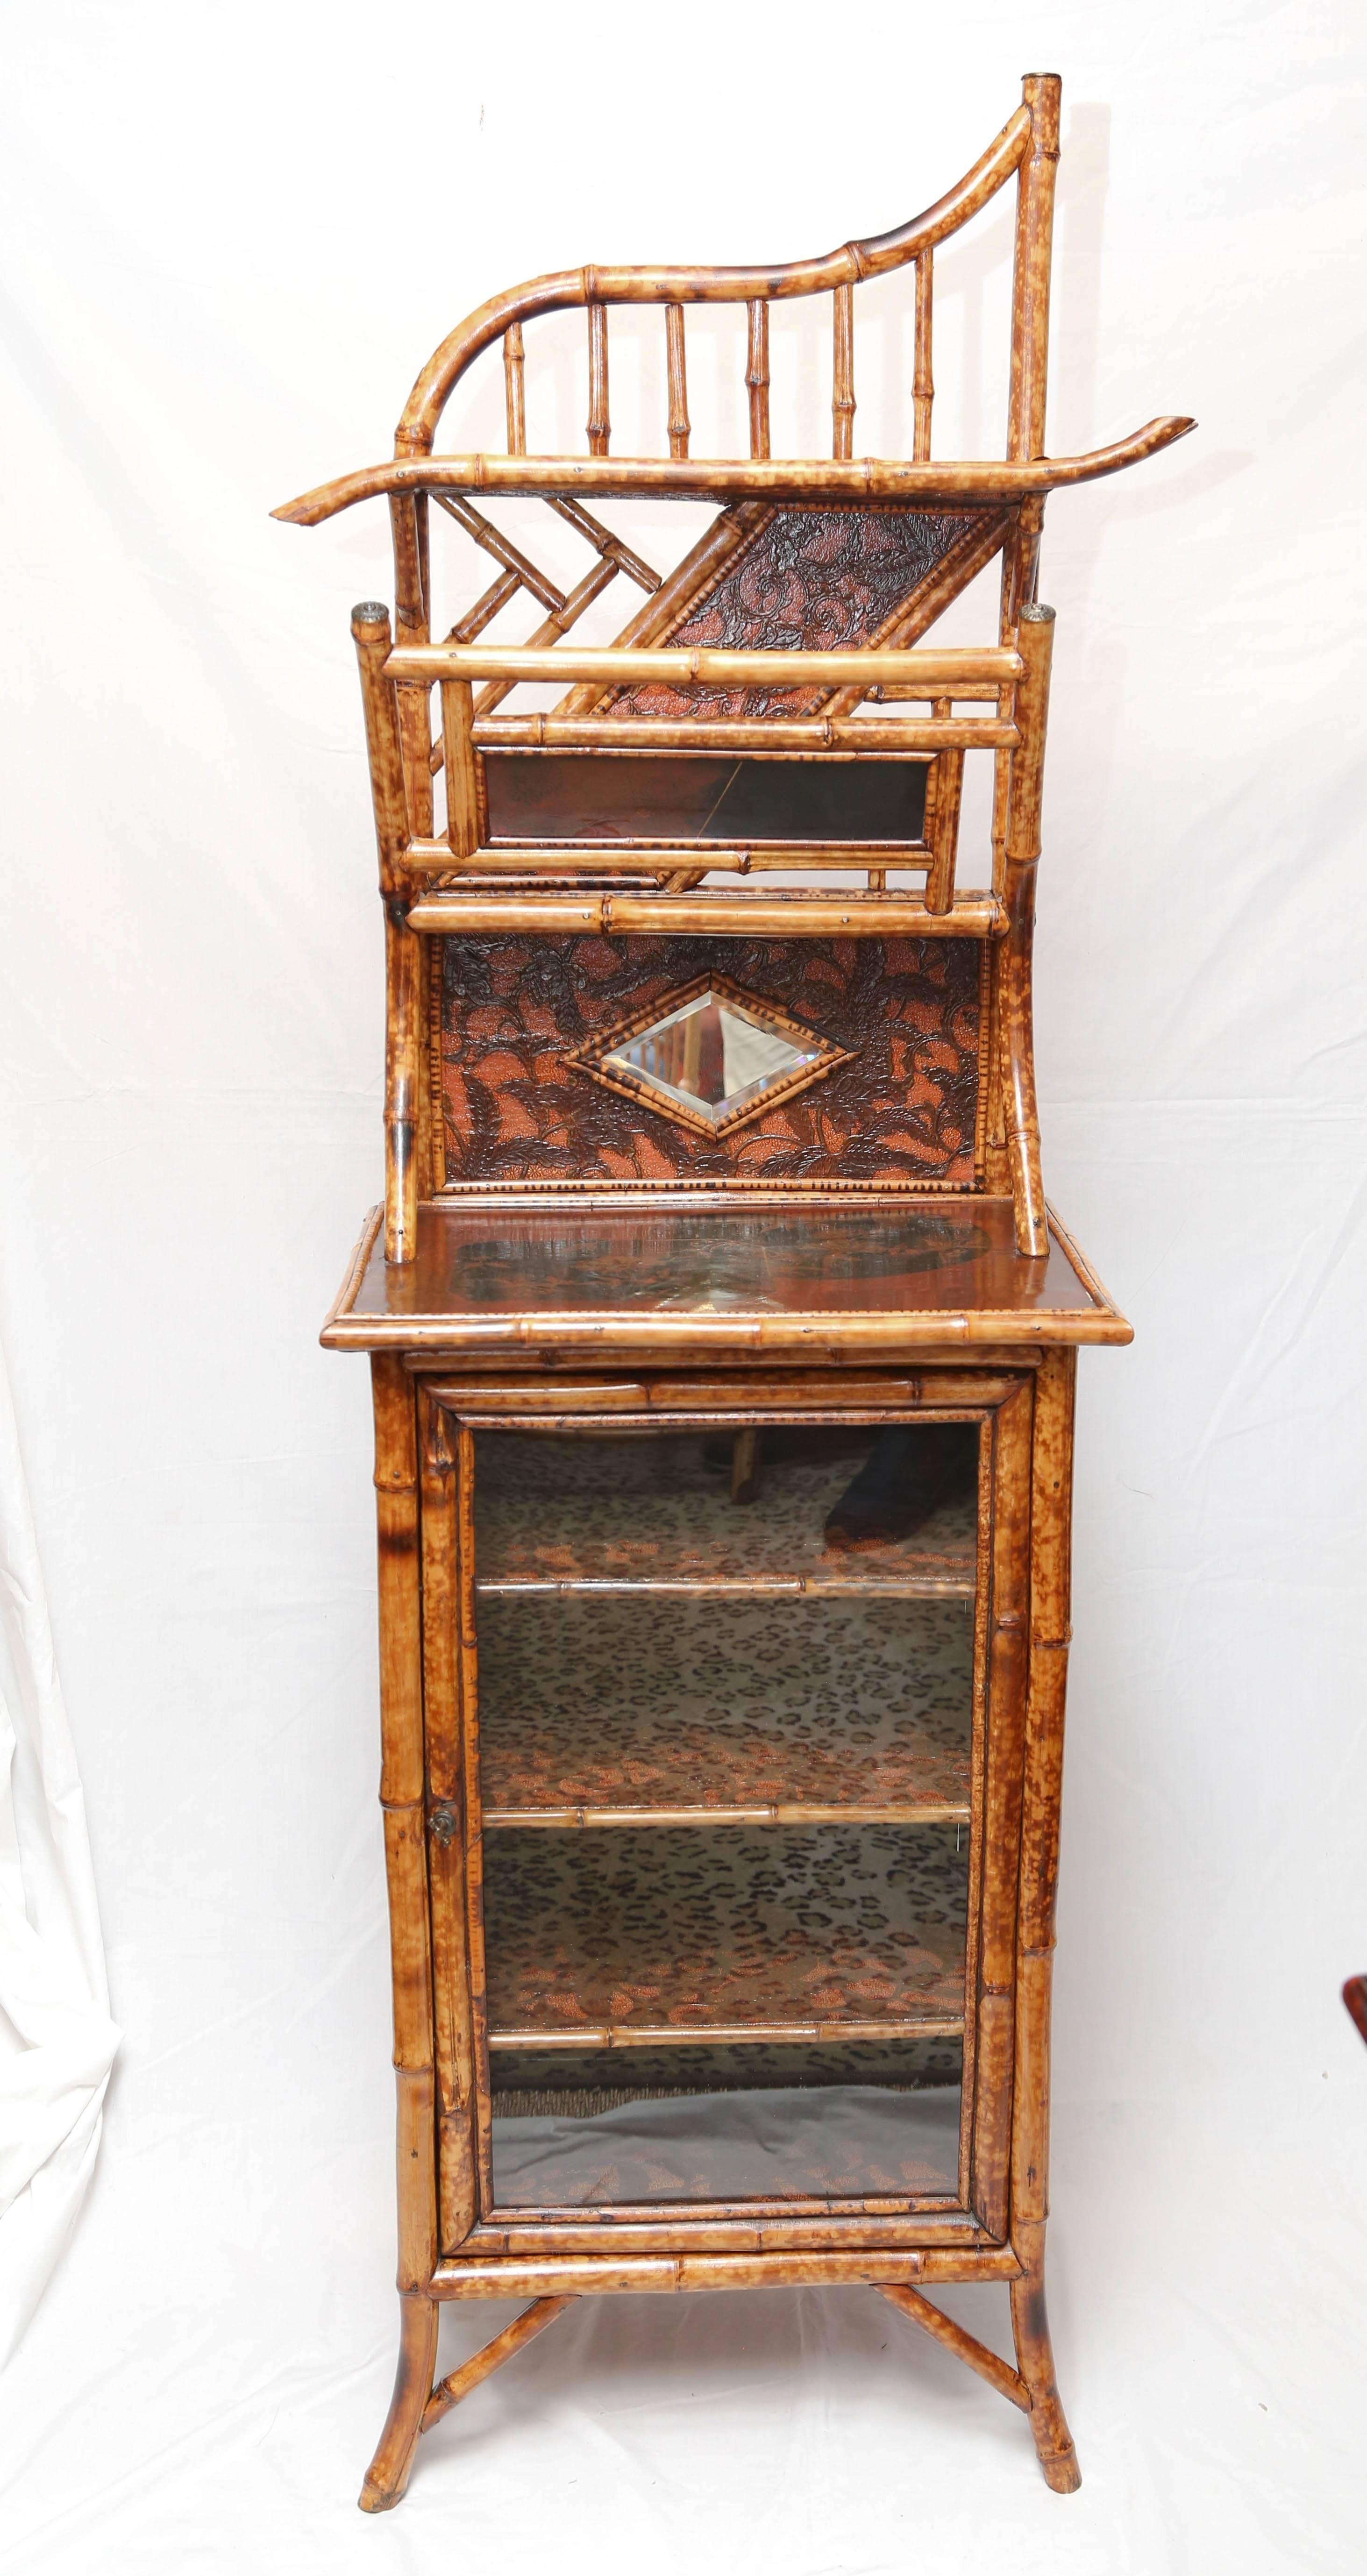 A 19th century English bamboo cabinet with mirror, shelve and leather paper with a Japanning top. Compartment beneath enclosed by glass panel door.
In perfect condition.